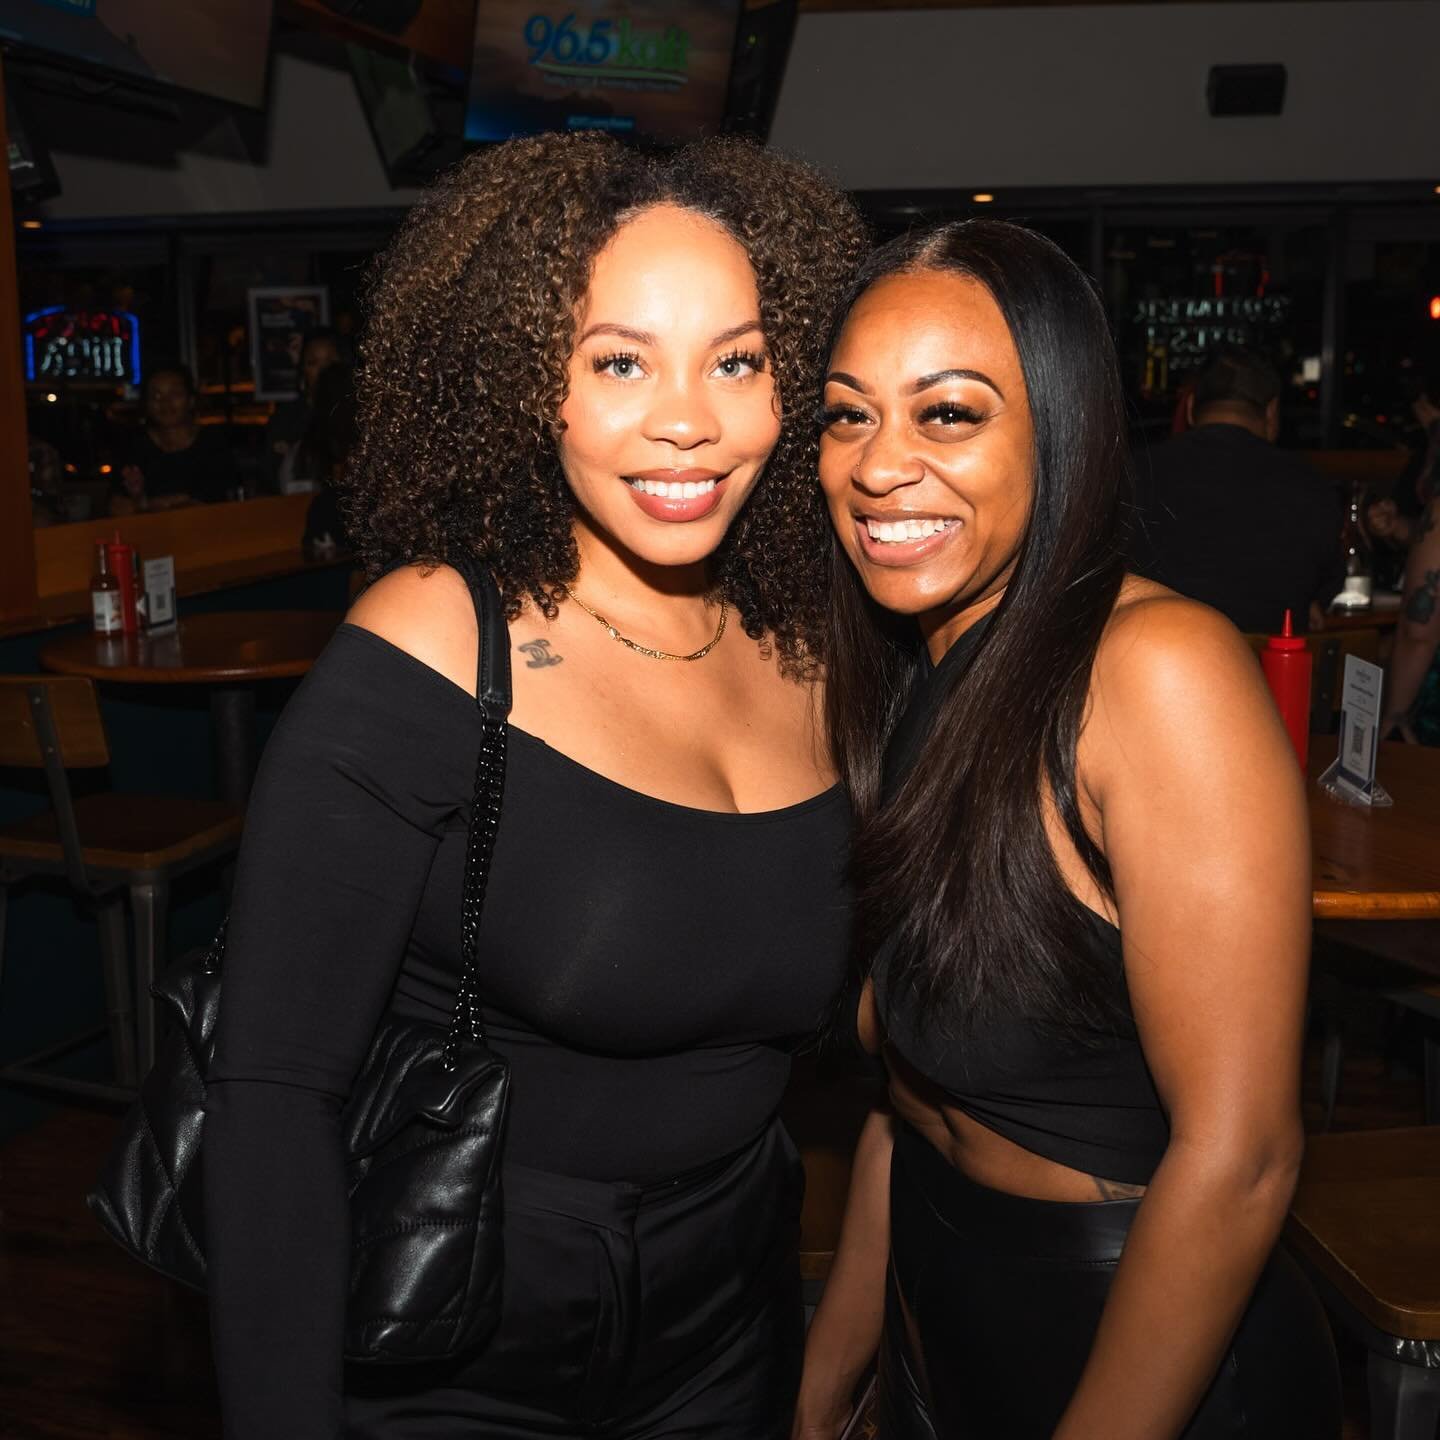 Saturdays are for friends and ACO 👯 Today we&rsquo;ll be showing Lakers vs Nuggets at 5:30pm, followed by the Bay FC vs San Diego watch party at 7PM ! 

Come out and enjoy the games, as well as some delicious drinks and bites from our menu. See you 